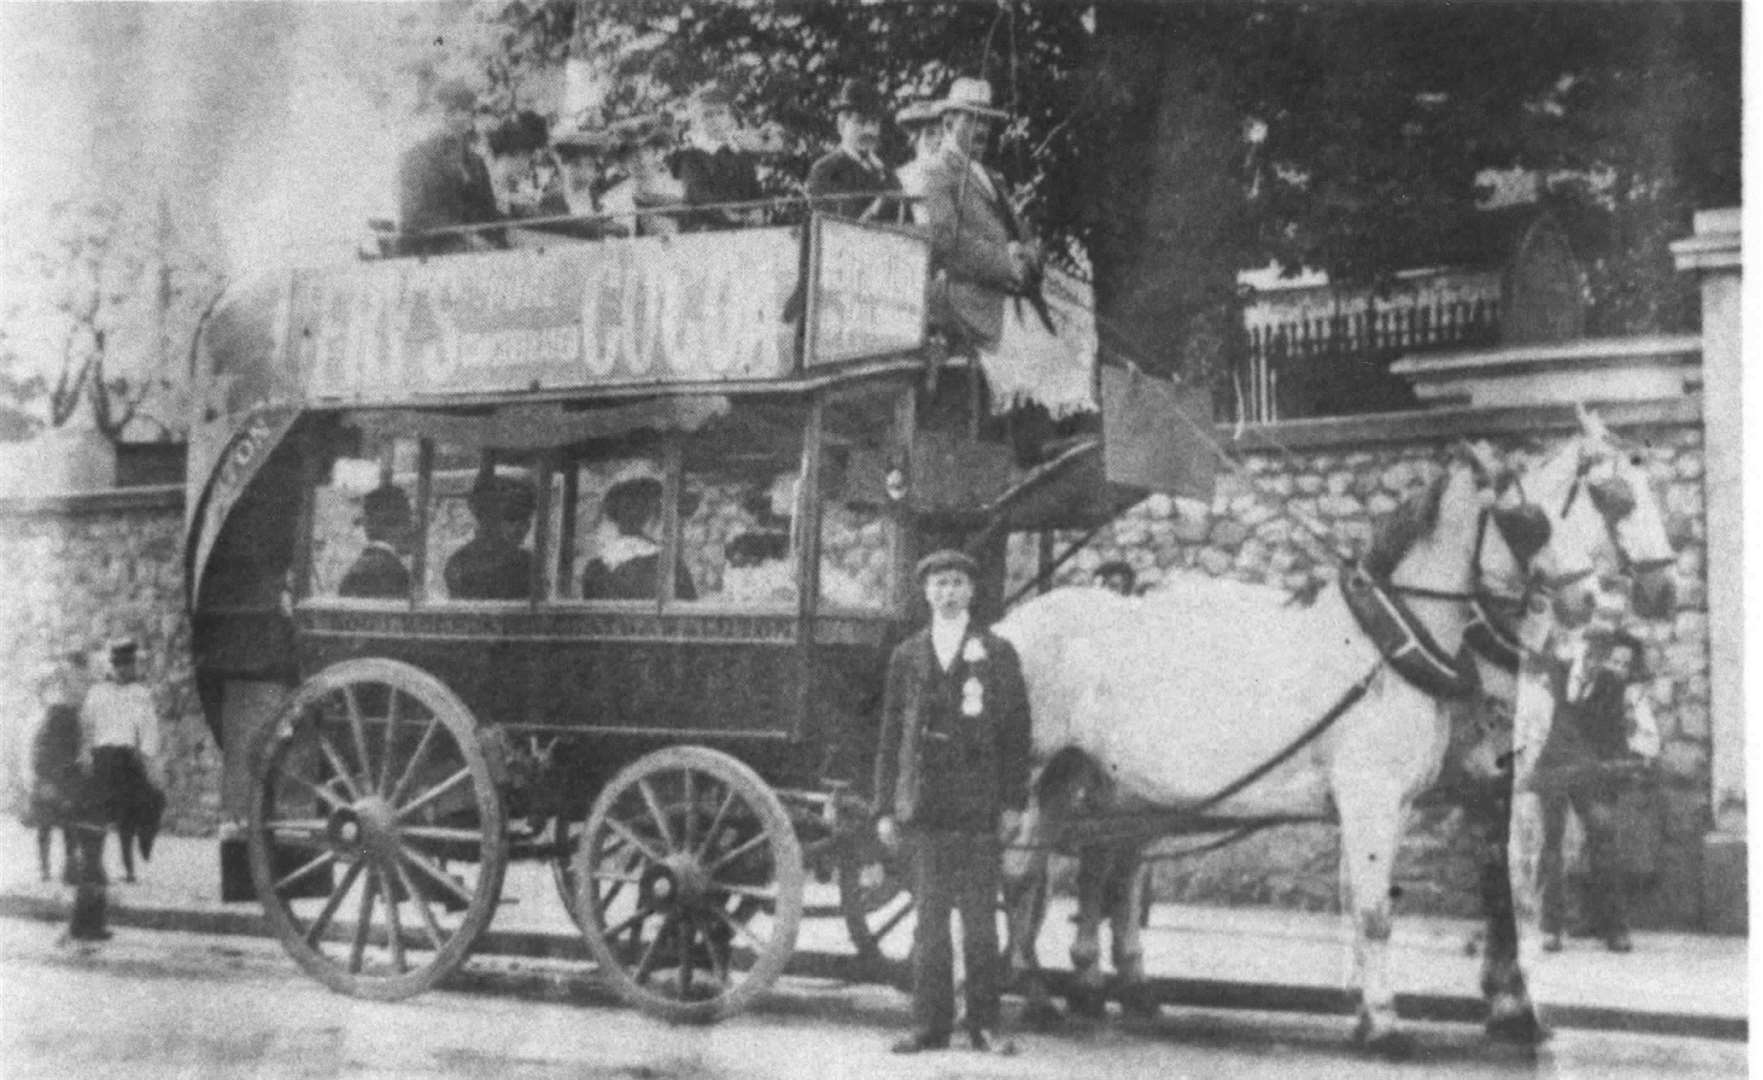 This Horsebus service operated between the Old Gun at Strood and the Hen and Chicks, Luton